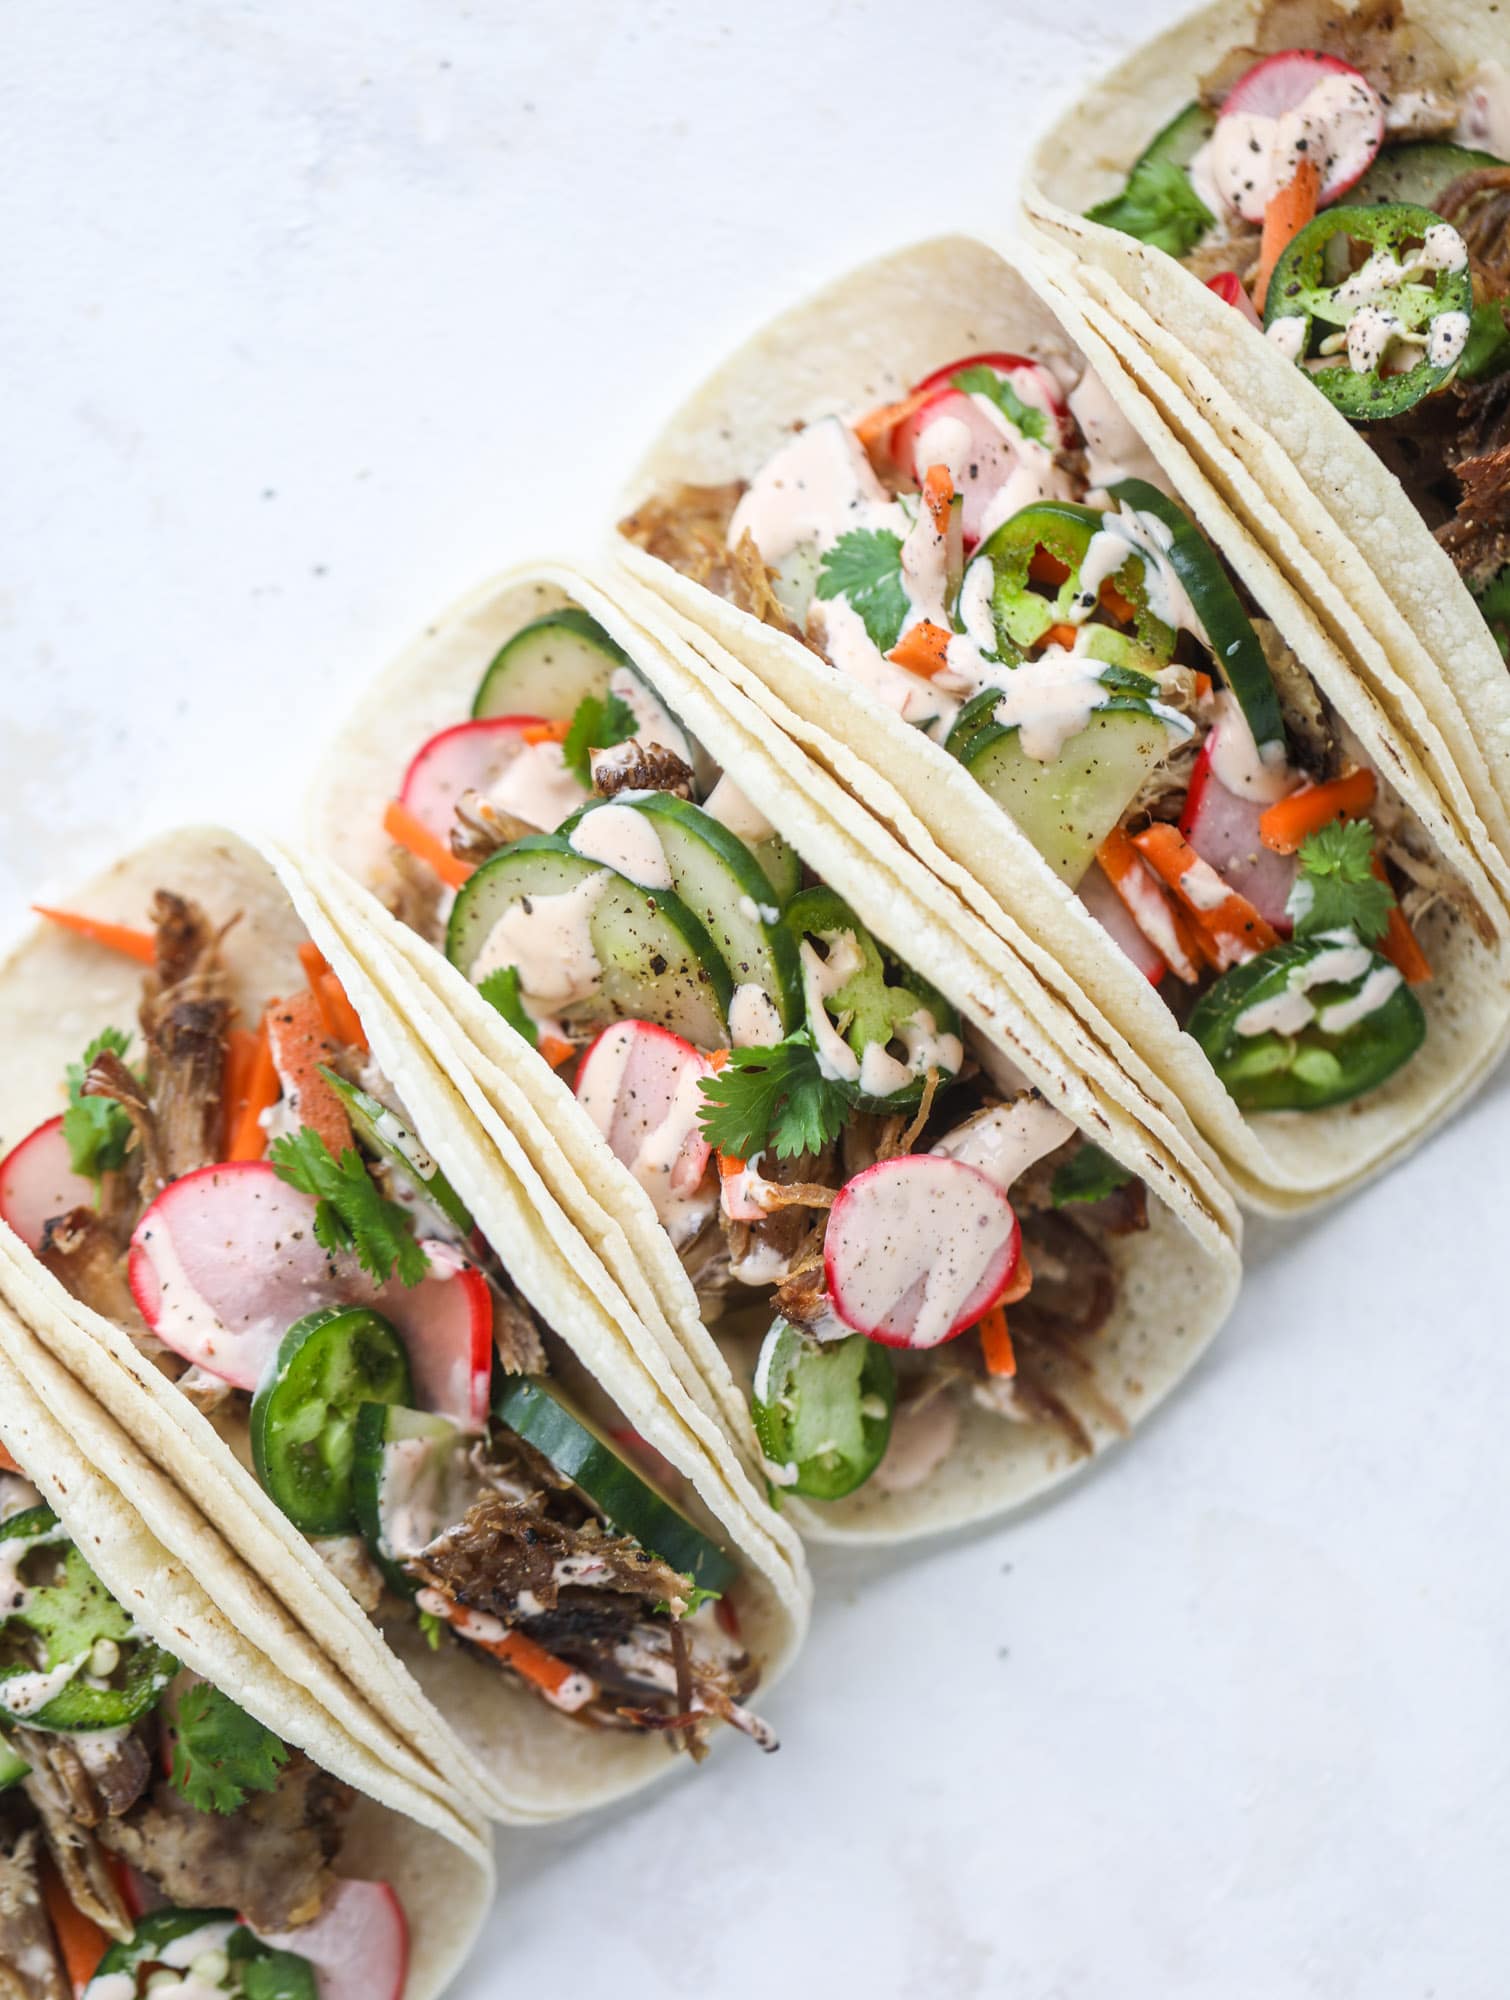 These bahn mi tacos are the perfect twist on the classic sandwich! Juicy pulled pork, pickled veggies, a tangy crema and loads of flavor. Bahn mi tacos are a delish weeknight meal or also work great if you have pork leftovers! I howsweeteats.com #bahn #mi #tacos #pork #dinner